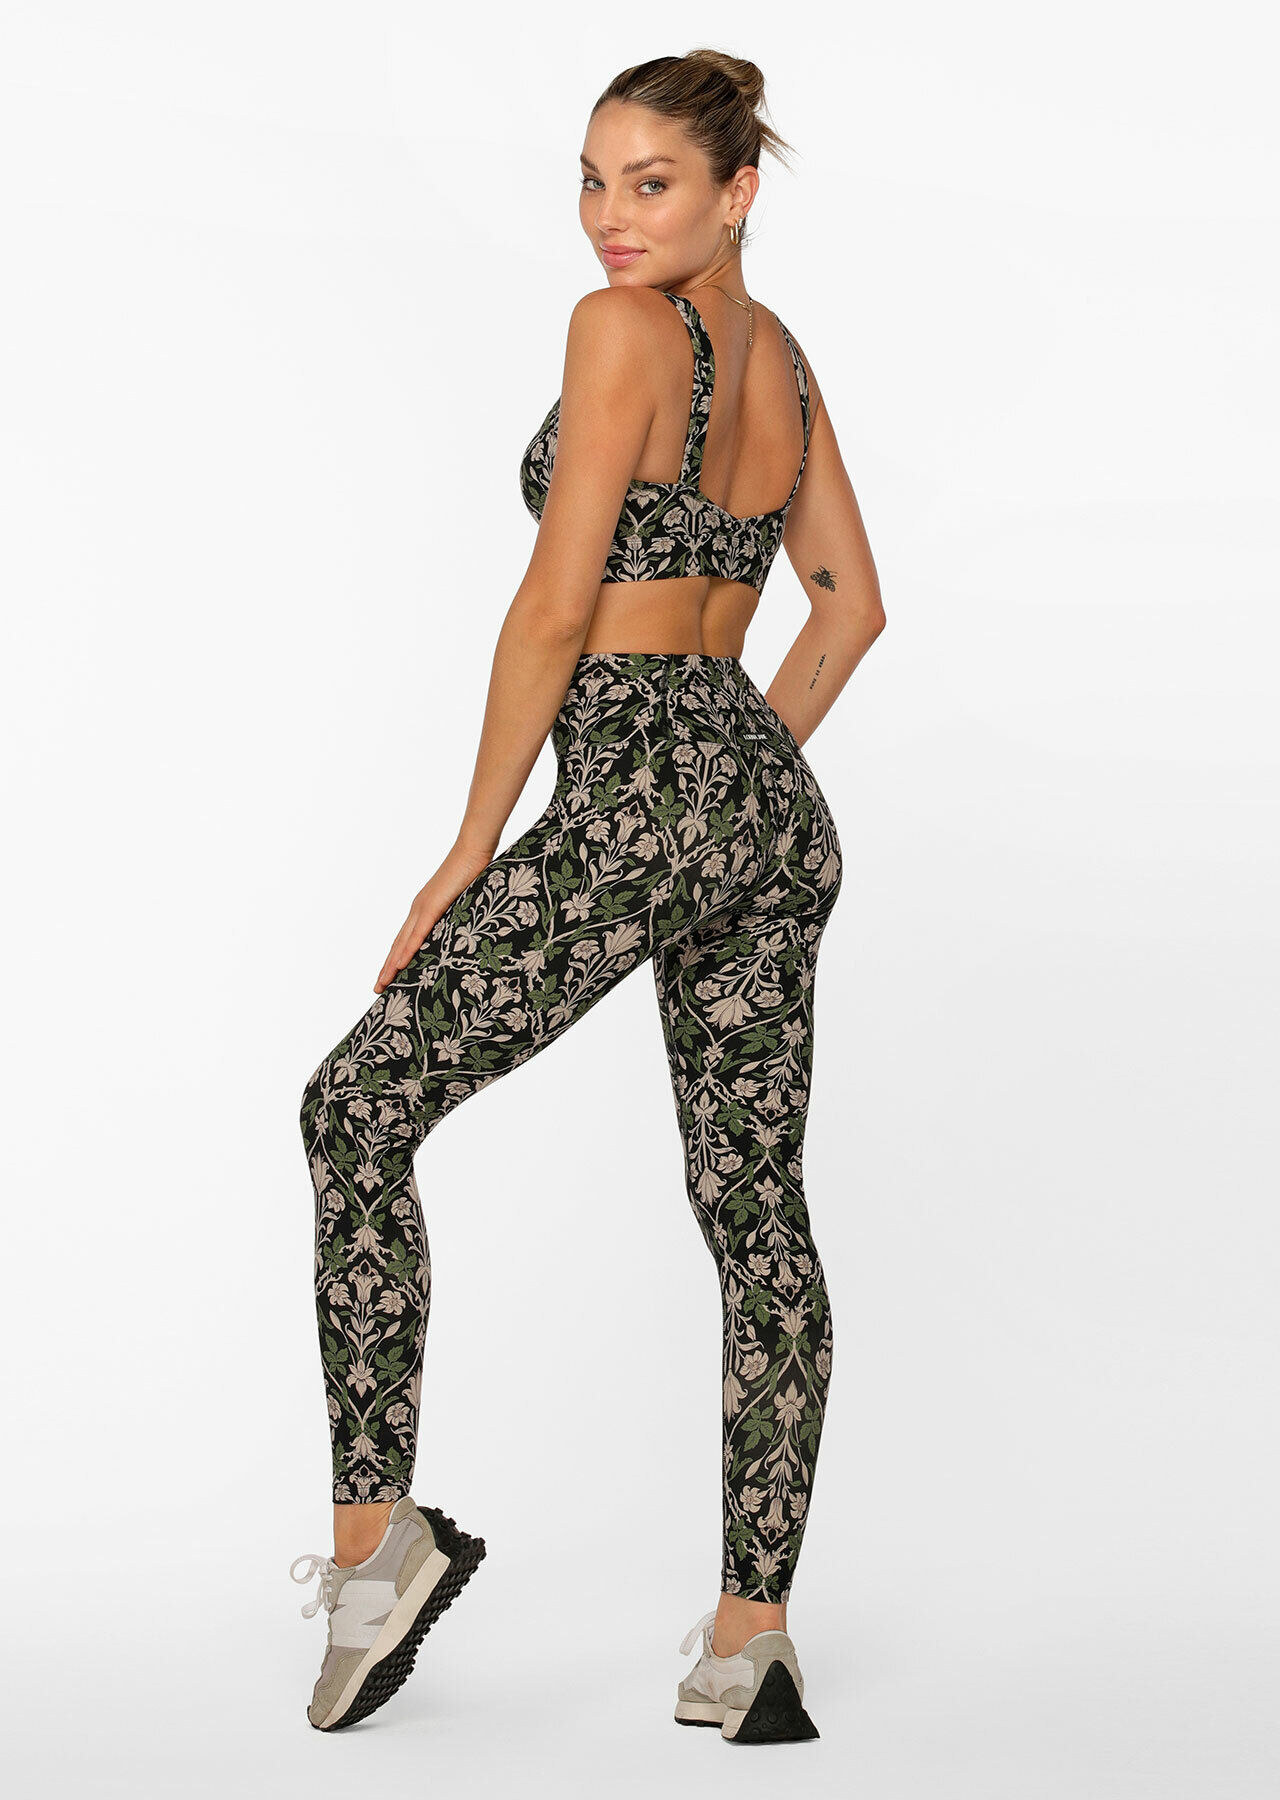 Printed Leggings For Women | Colorful & Patterns | Evolve Fit Wear